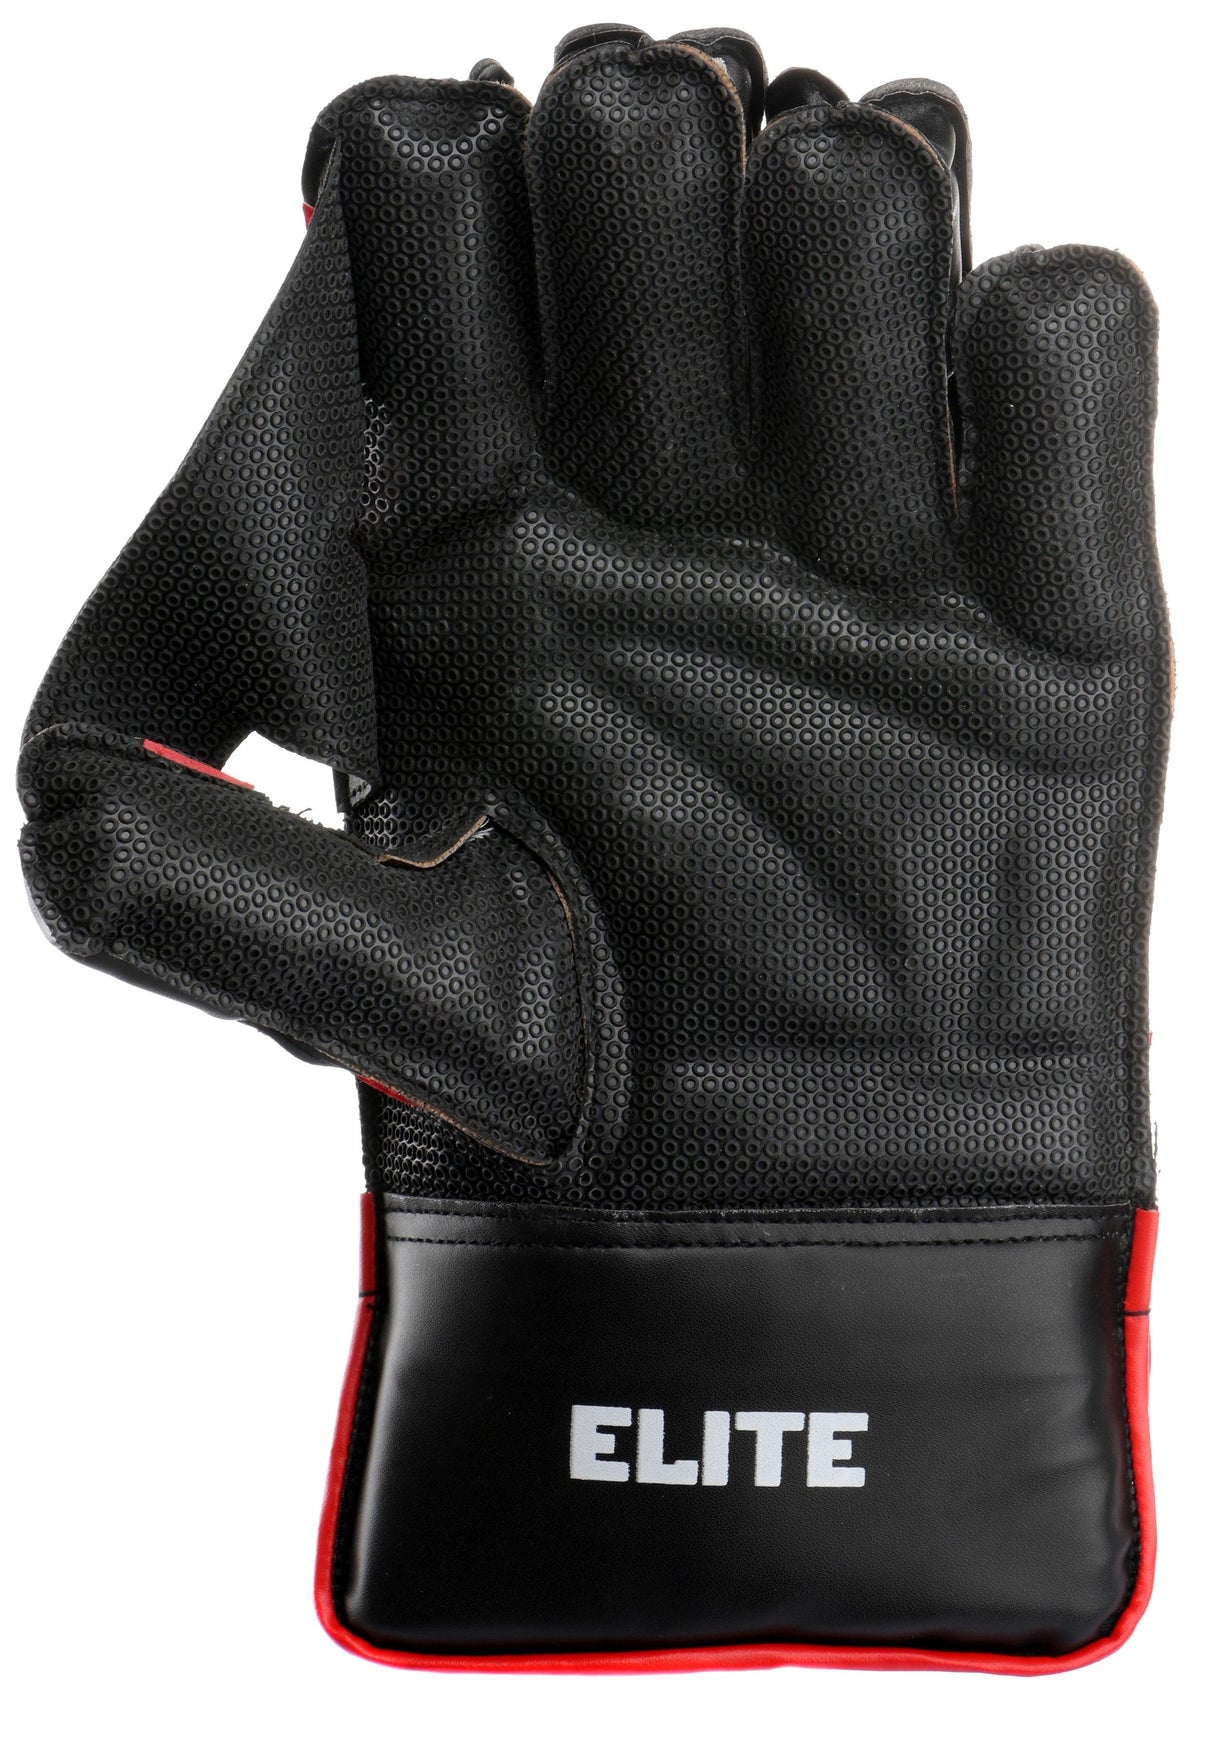 INS Elite Wicket-Keeping Gloves - Shoply